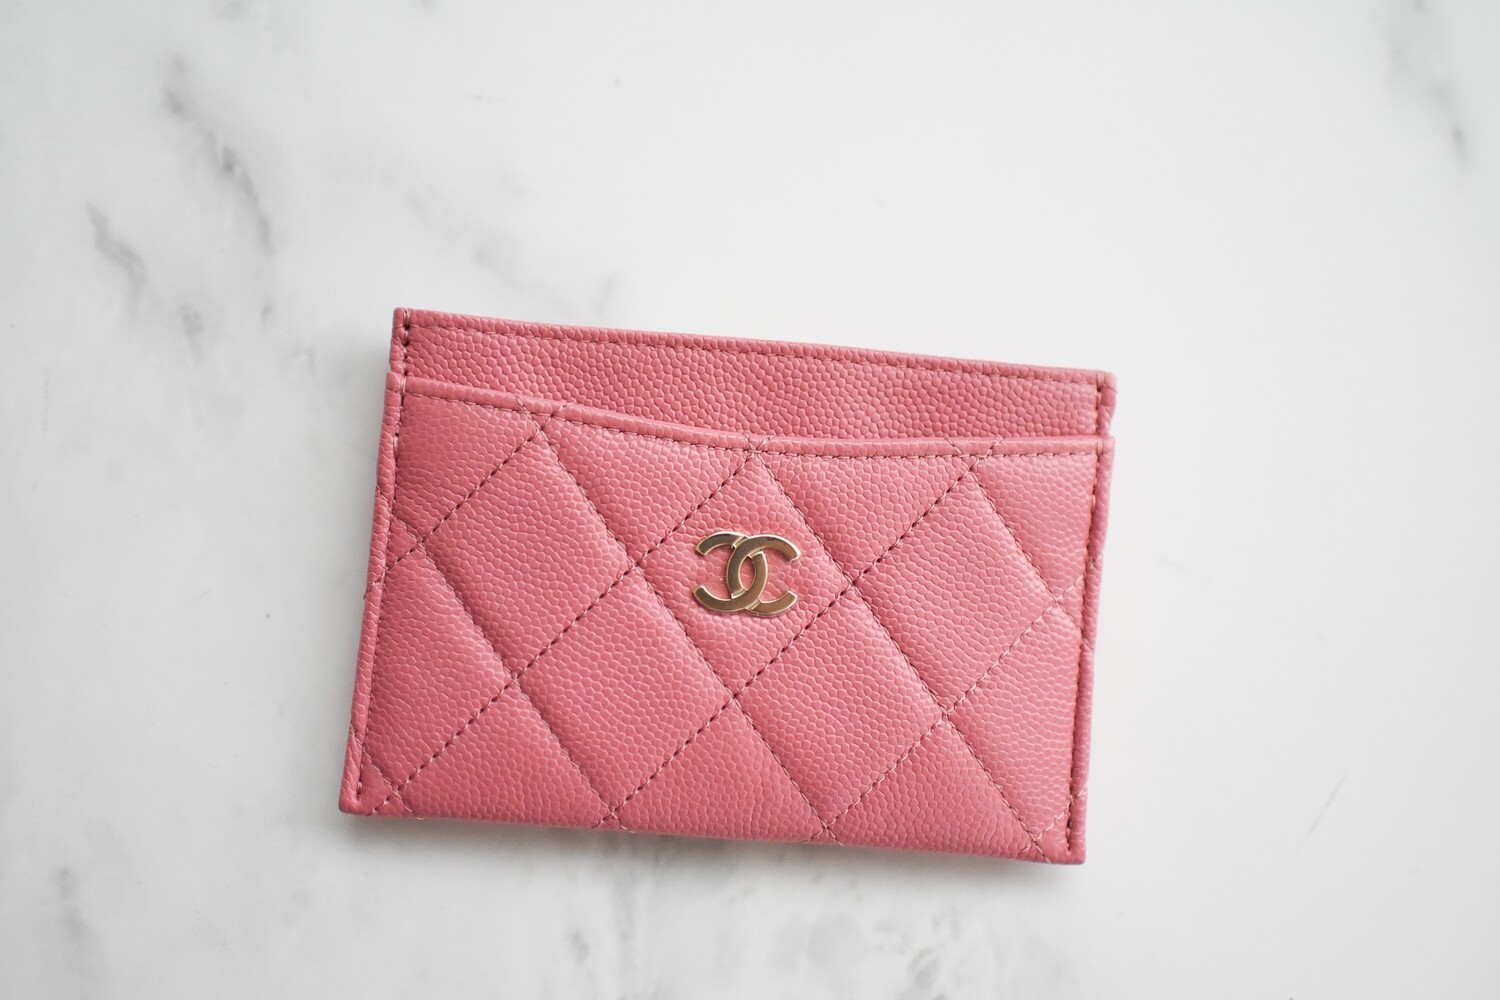 Chanel SLG Flat Cardholder, 22A Pink Caviar Leather with Gold Hardware, New in Box GA001